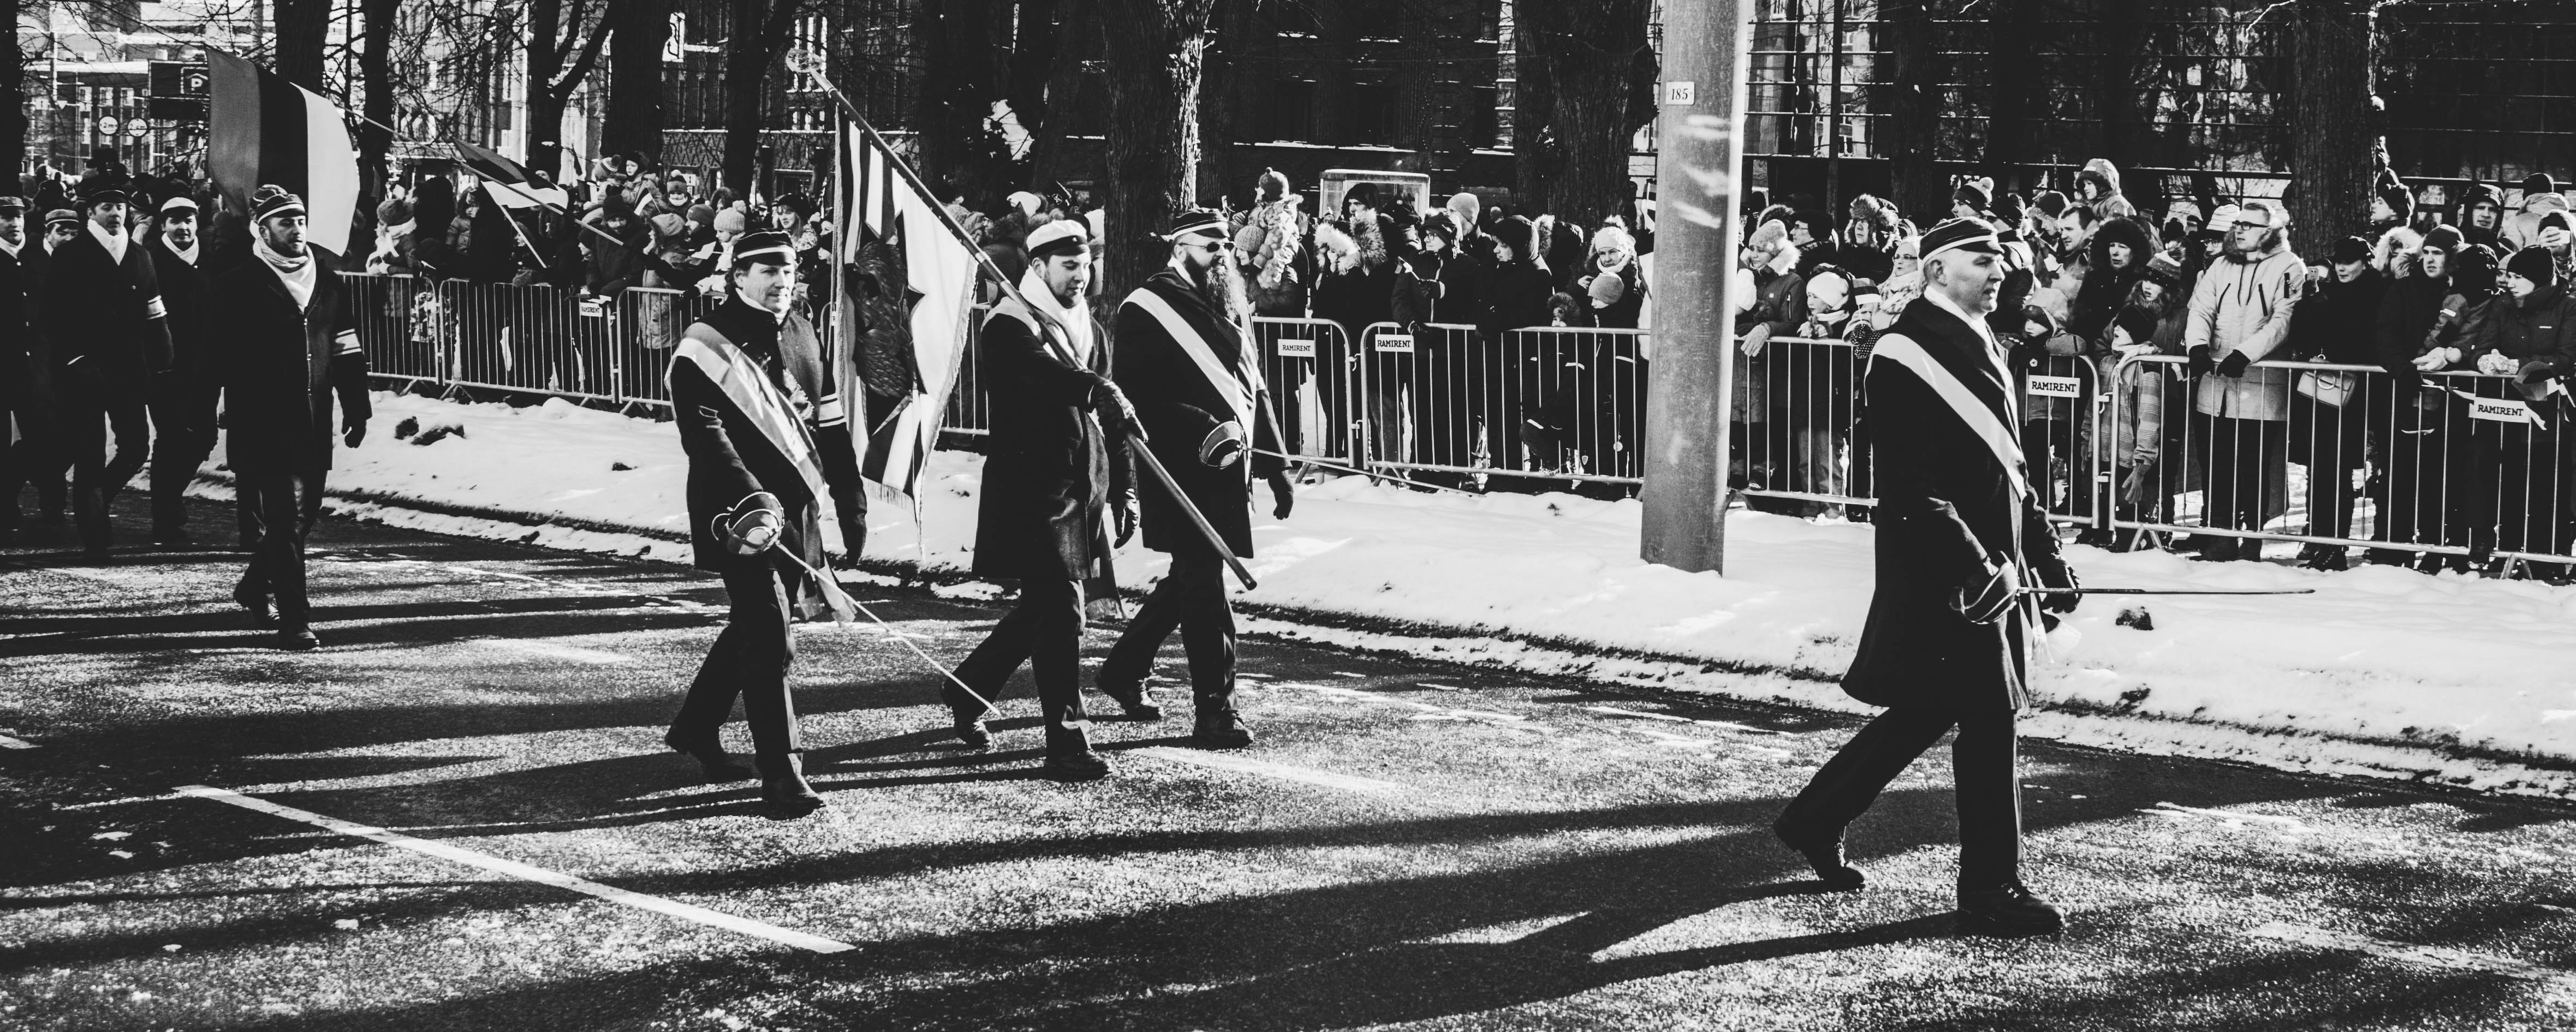 Men Walking on Streets Carrying Flag during Parade In Grayscale Photo, Administration, Adult, Black-and-white, Crowd, HQ Photo